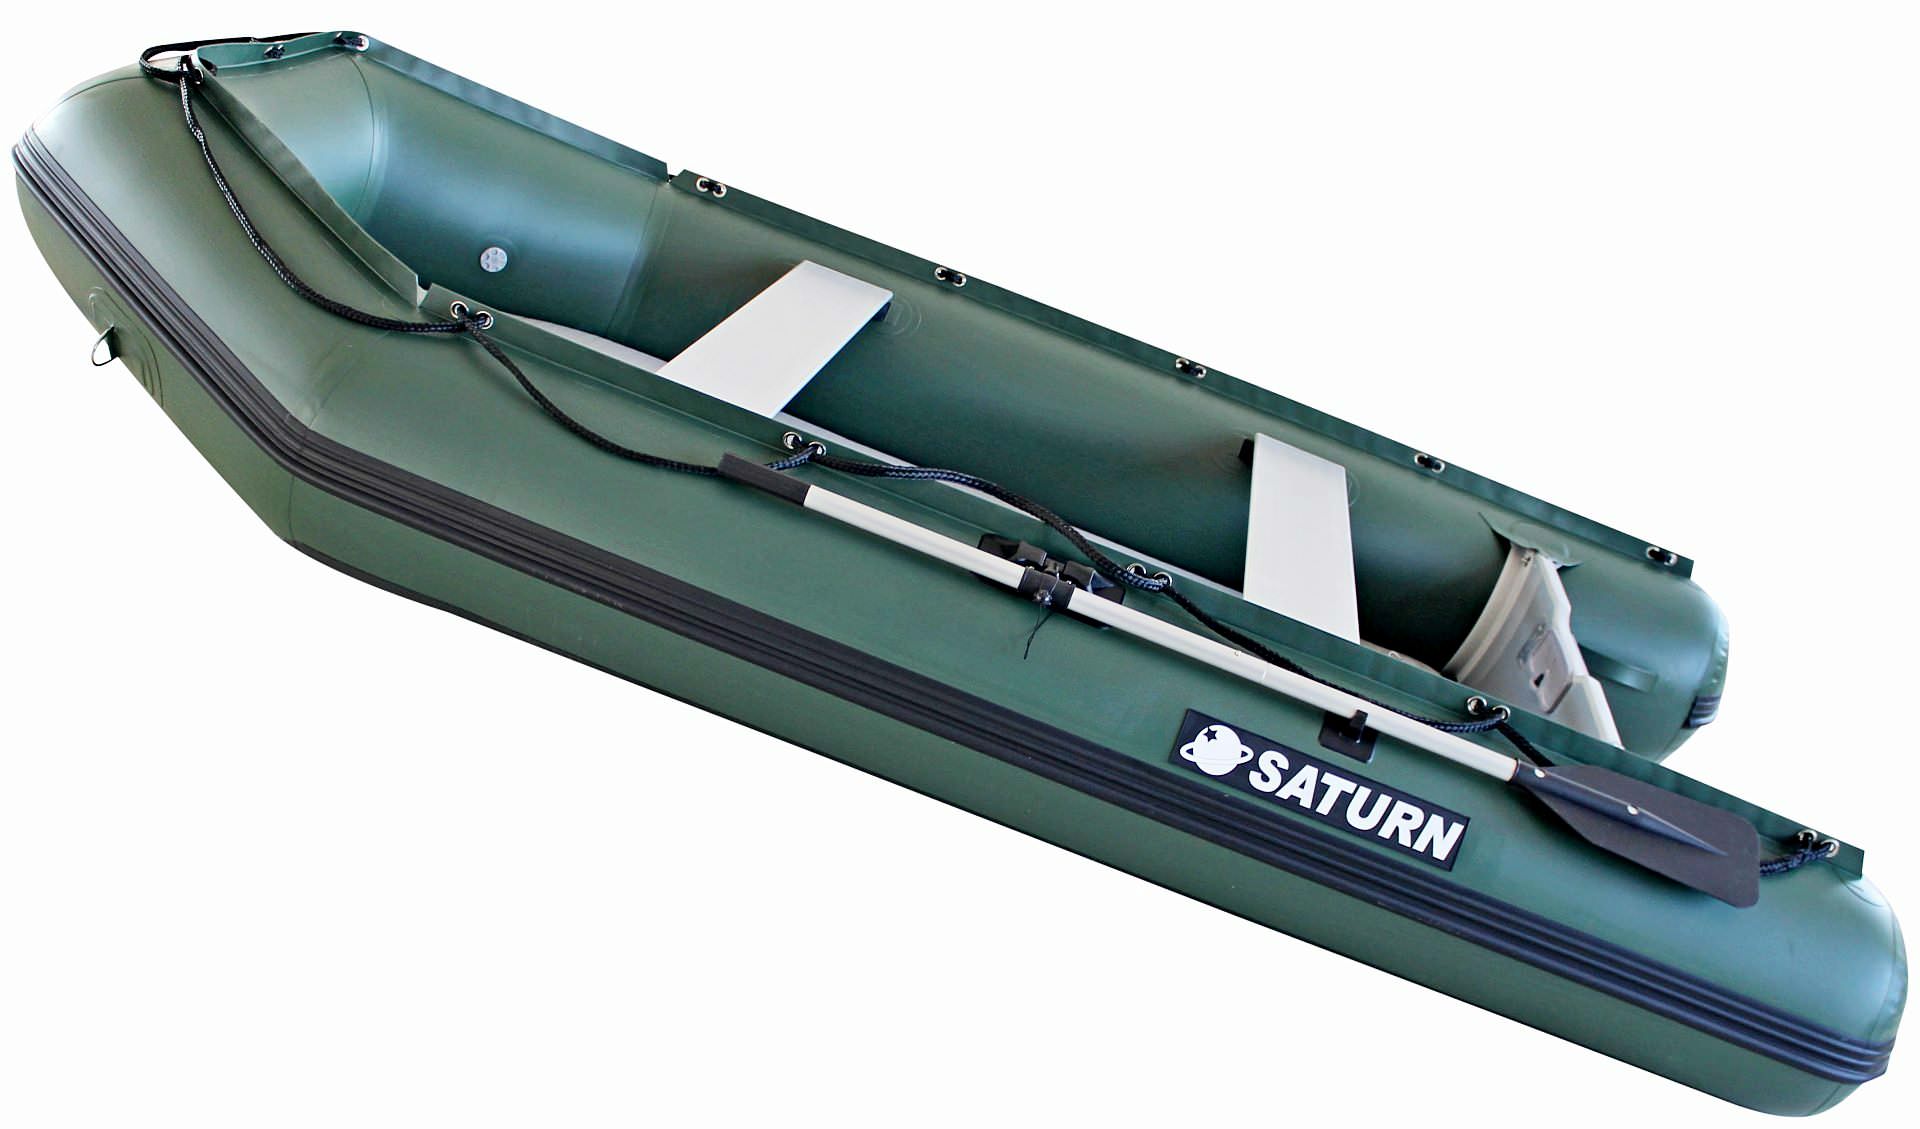 World's Most Versatile Inflatable Fishing Boat